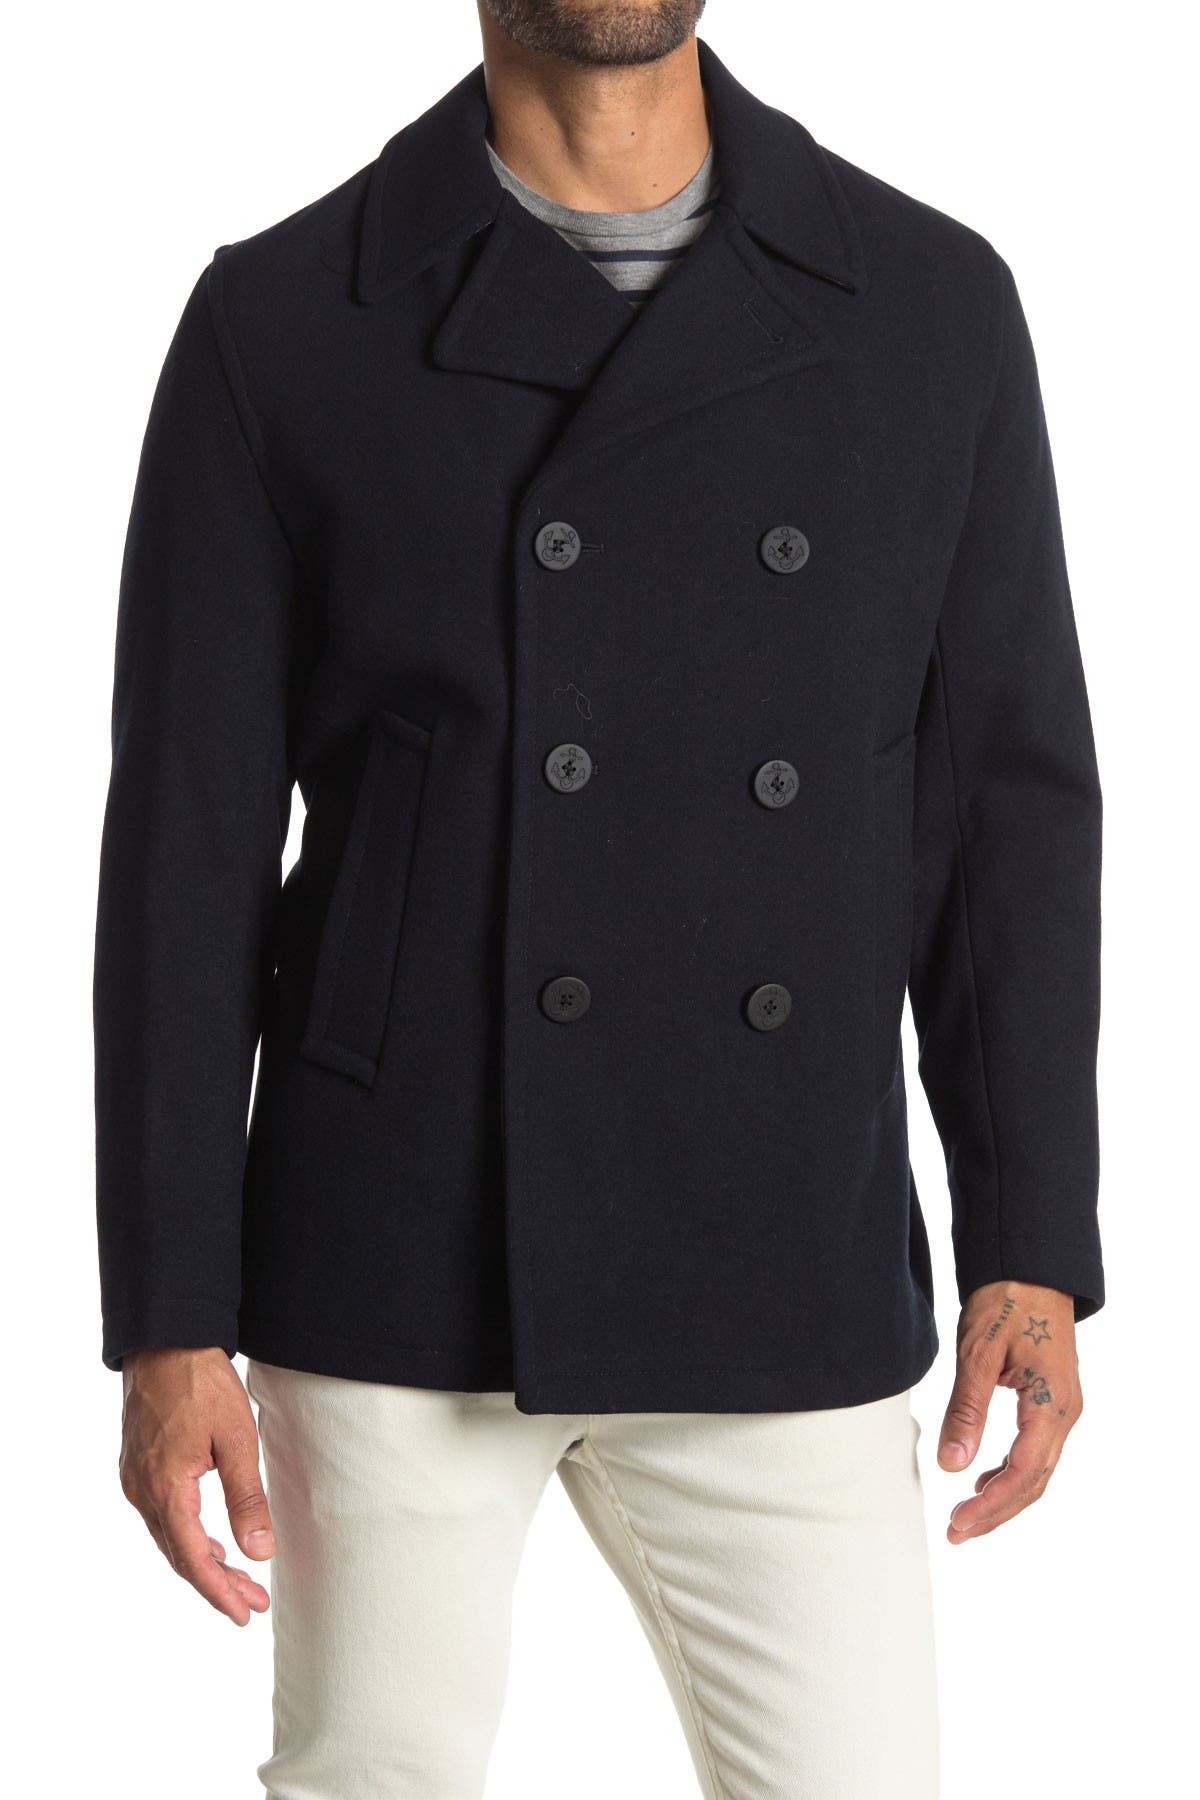 michael kors wool blend double breasted peacoat